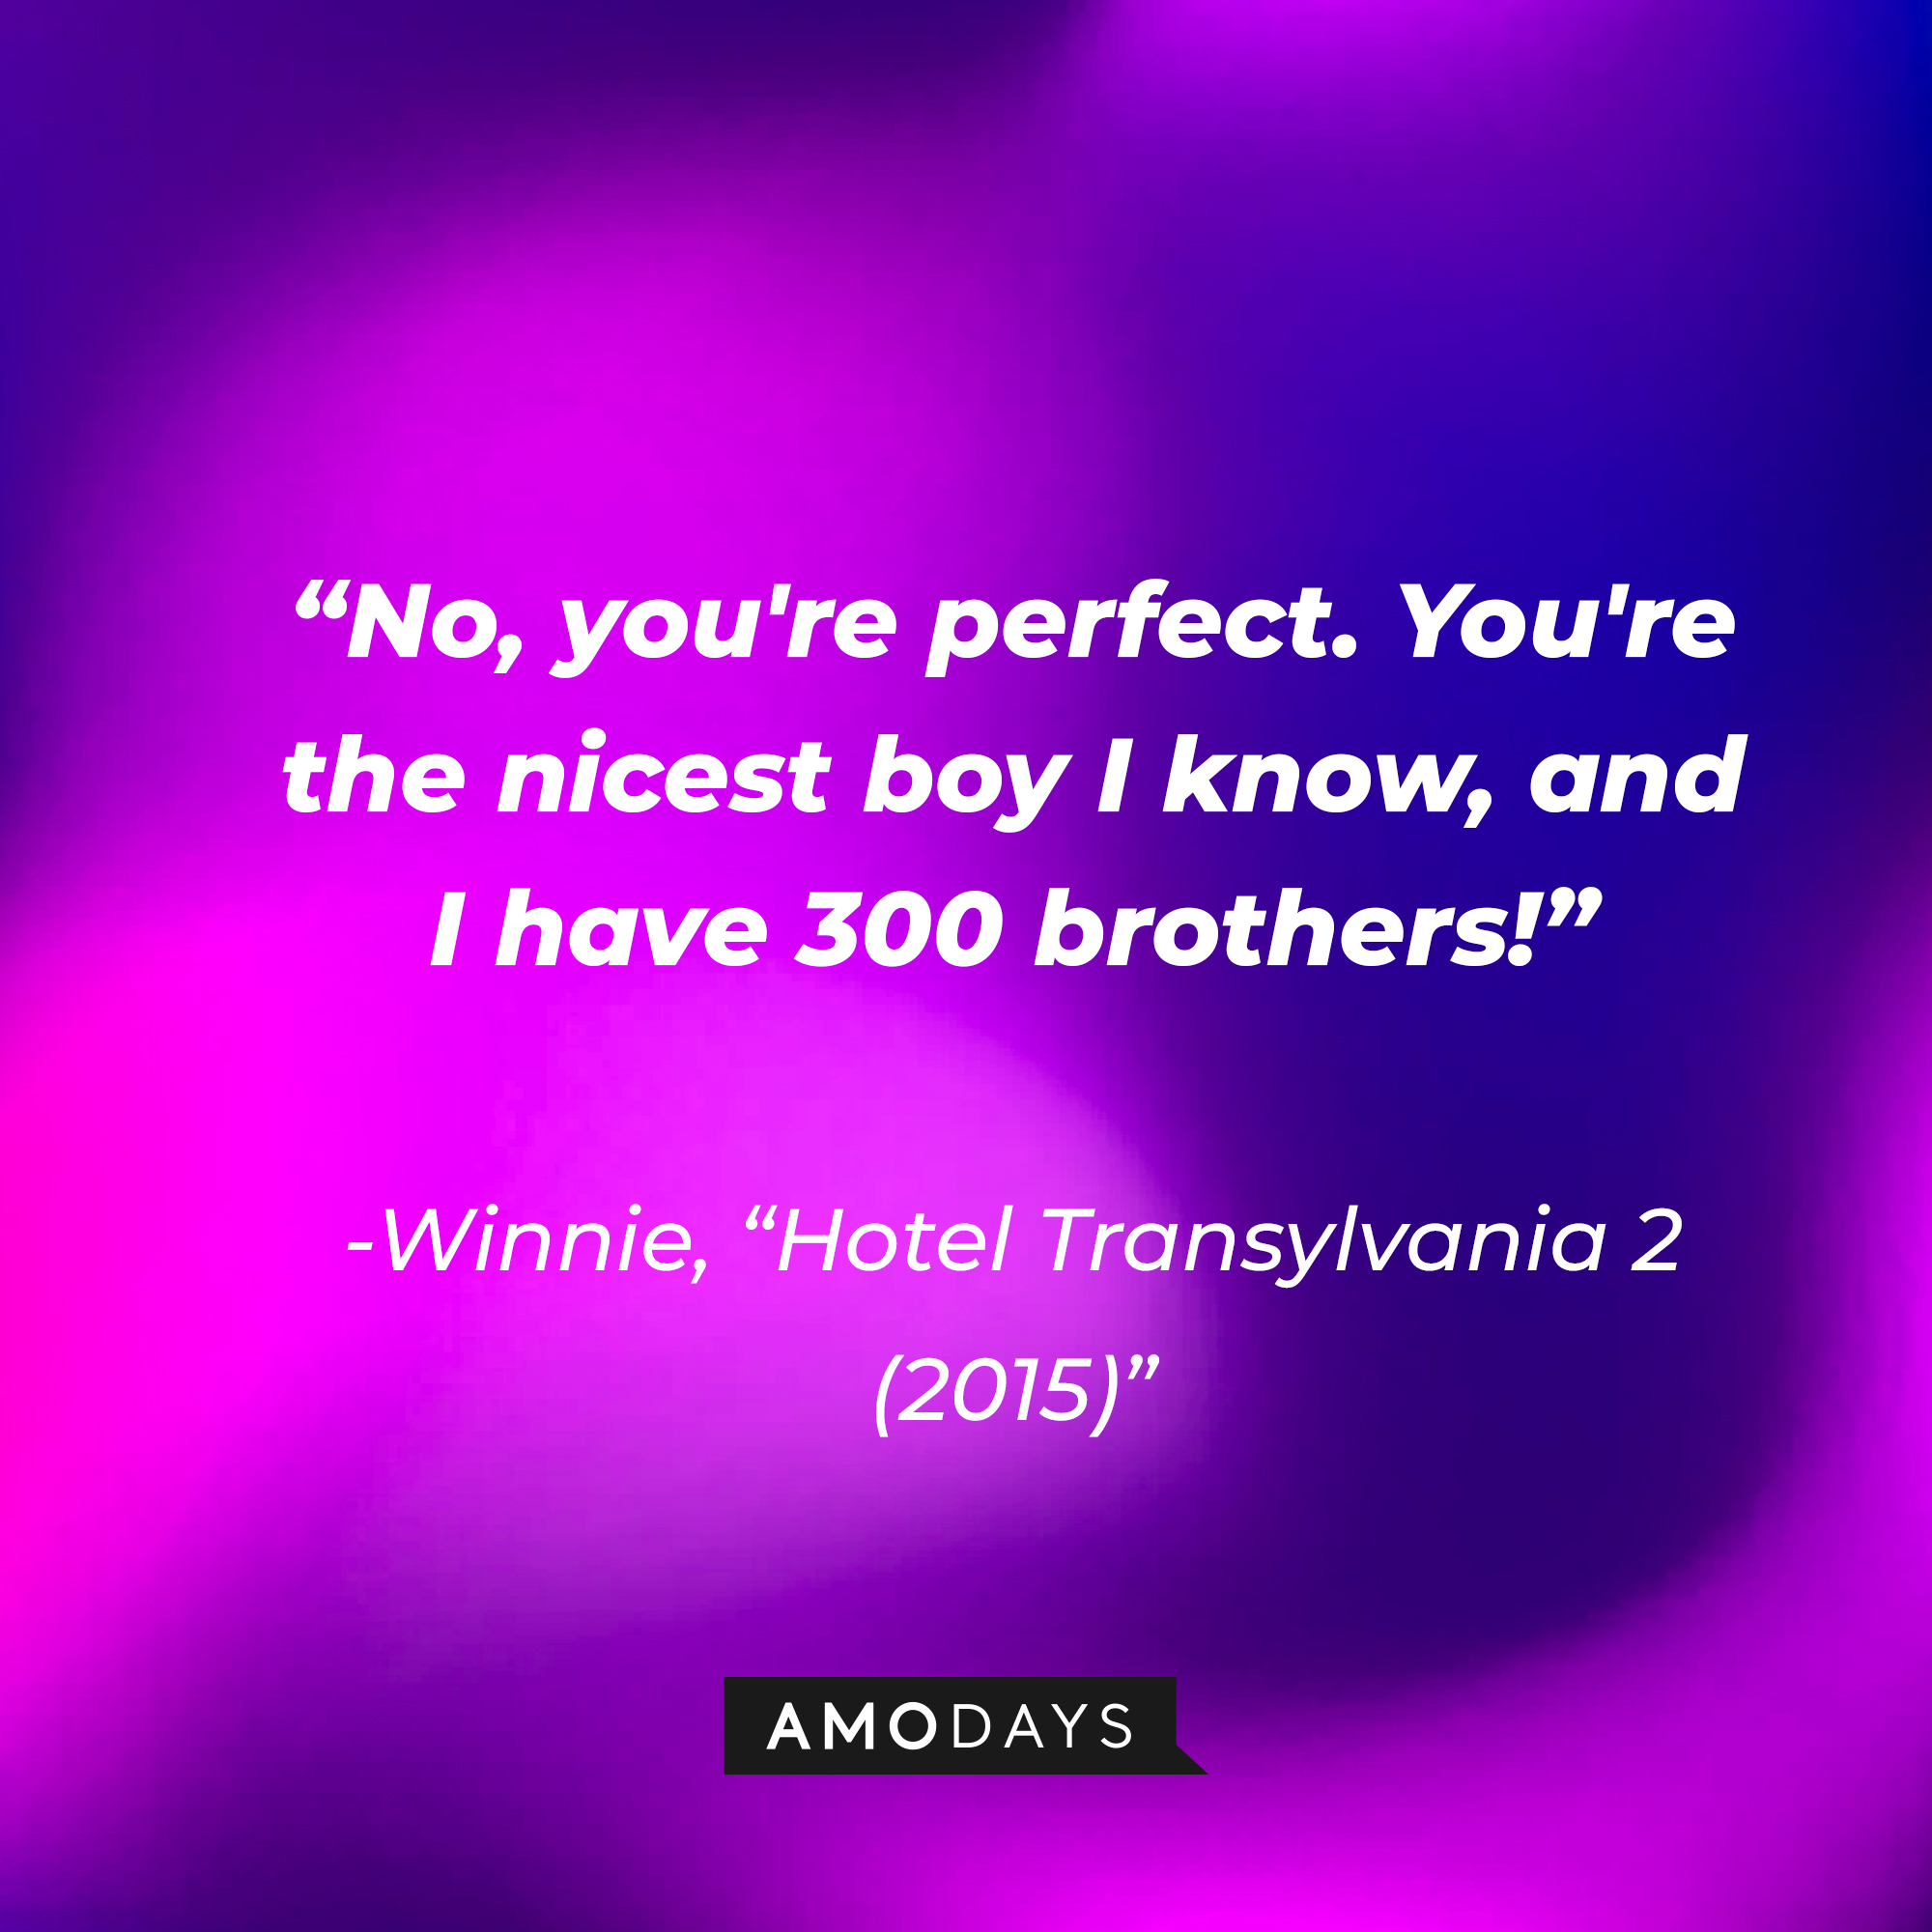 Winnie's quote: “No, you're perfect. You're the nicest boy I know, and I have 300 brothers!” | Source: Amodays